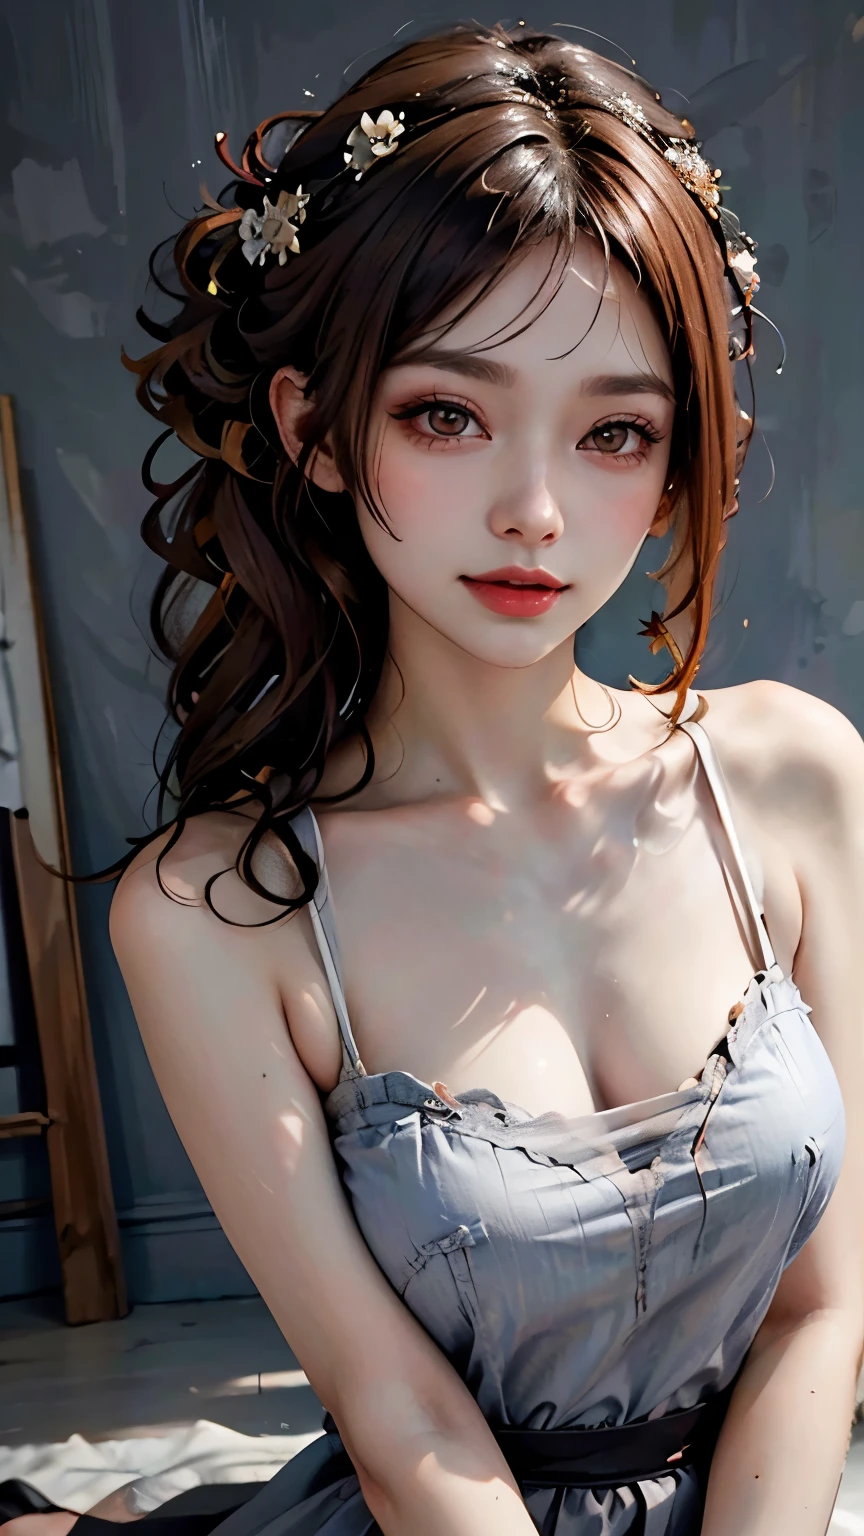 （（masterpiece，best quality，high definition）），1 girl，（Realism），独奏，Colorful background，Colorful background，Shut up，Happy smile，Happy smile，beautiful auburn hair, Long curly hair, red headdress，big eyes,red eyes，Clear double eyelids, eyelash, Ears exposed, long neck, absolute area, skirt, ((face close-up)), (Draw all the heads, Shoulder), 19 years old, Attractive proportions, glowing skin, Clean collarbone, golden ratio of face, perfect face shape, tear nevus, Mole on the chest, bangs, 干净bangs, lip gloss, thin lips, White skin, NUDE, Big breasts，Open your mouth wide，stick out tongue，There is a large amount of unknown  on the face